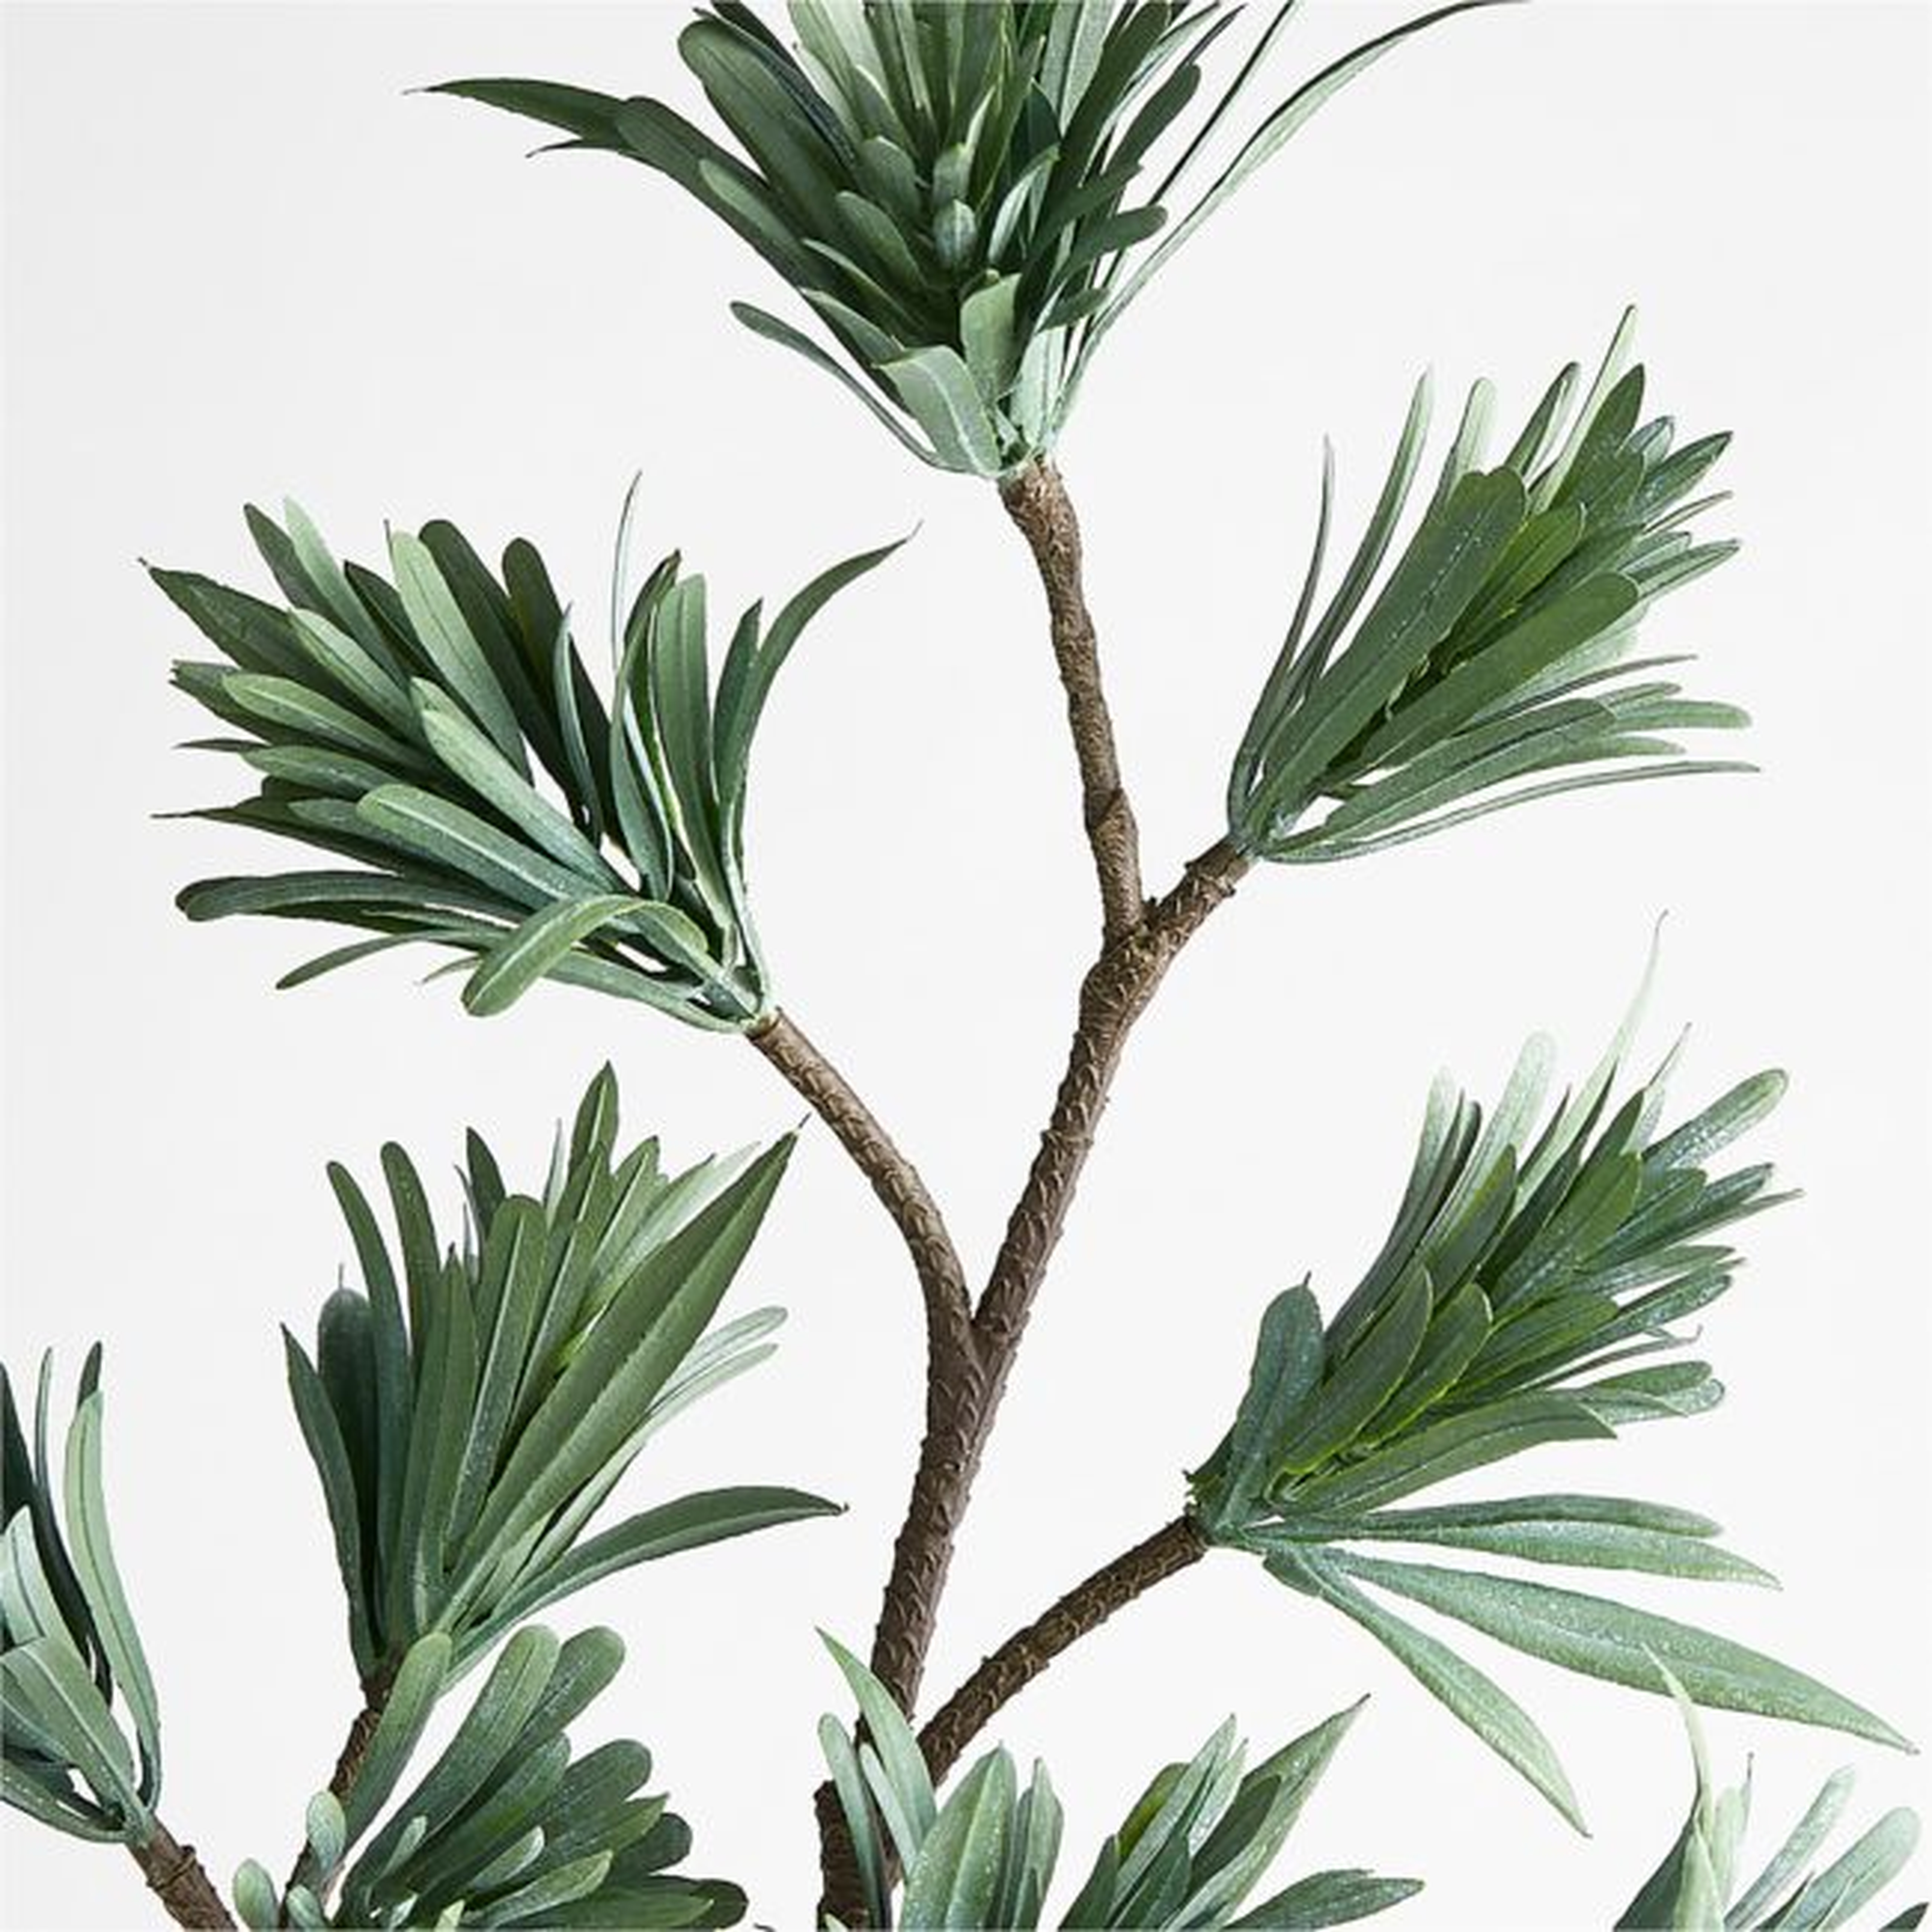 Japanese Black Pine Faux Stem - Crate and Barrel